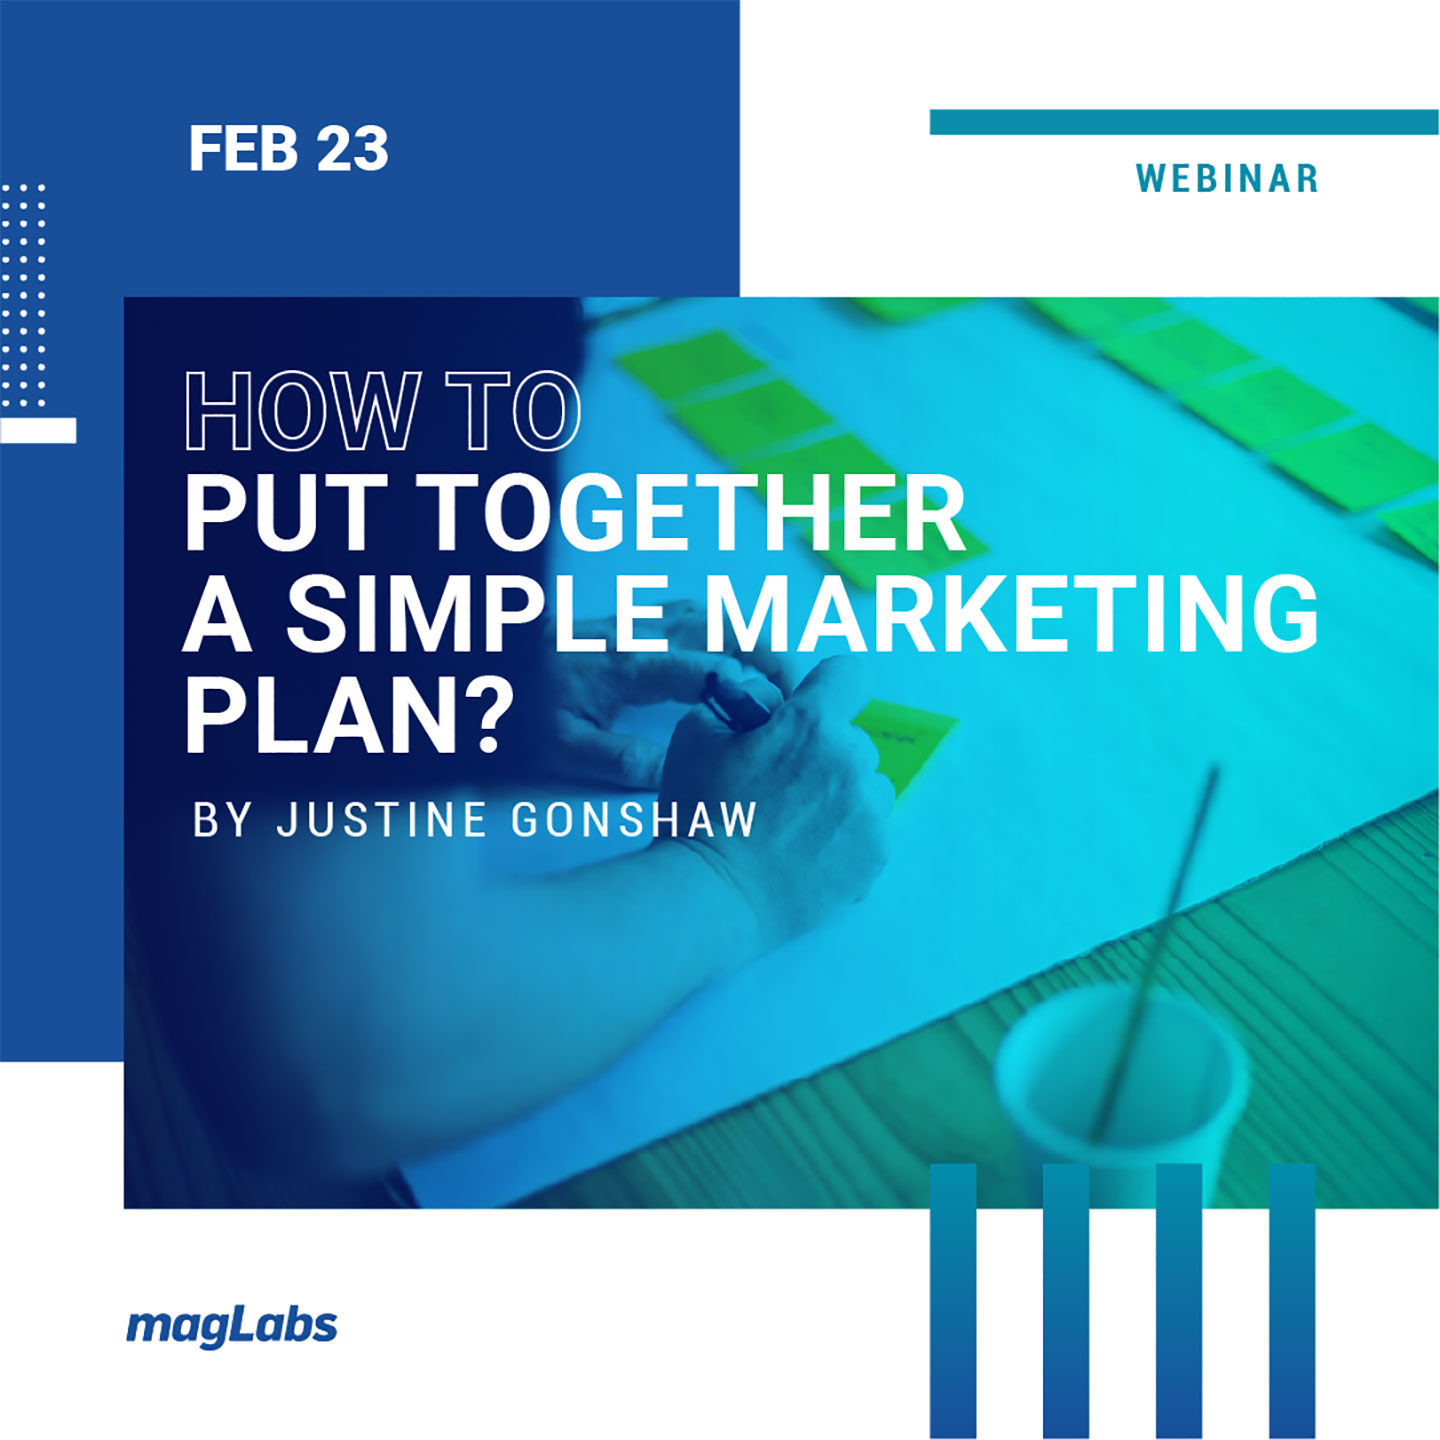 How to Put Together a Simple Marketing Plan